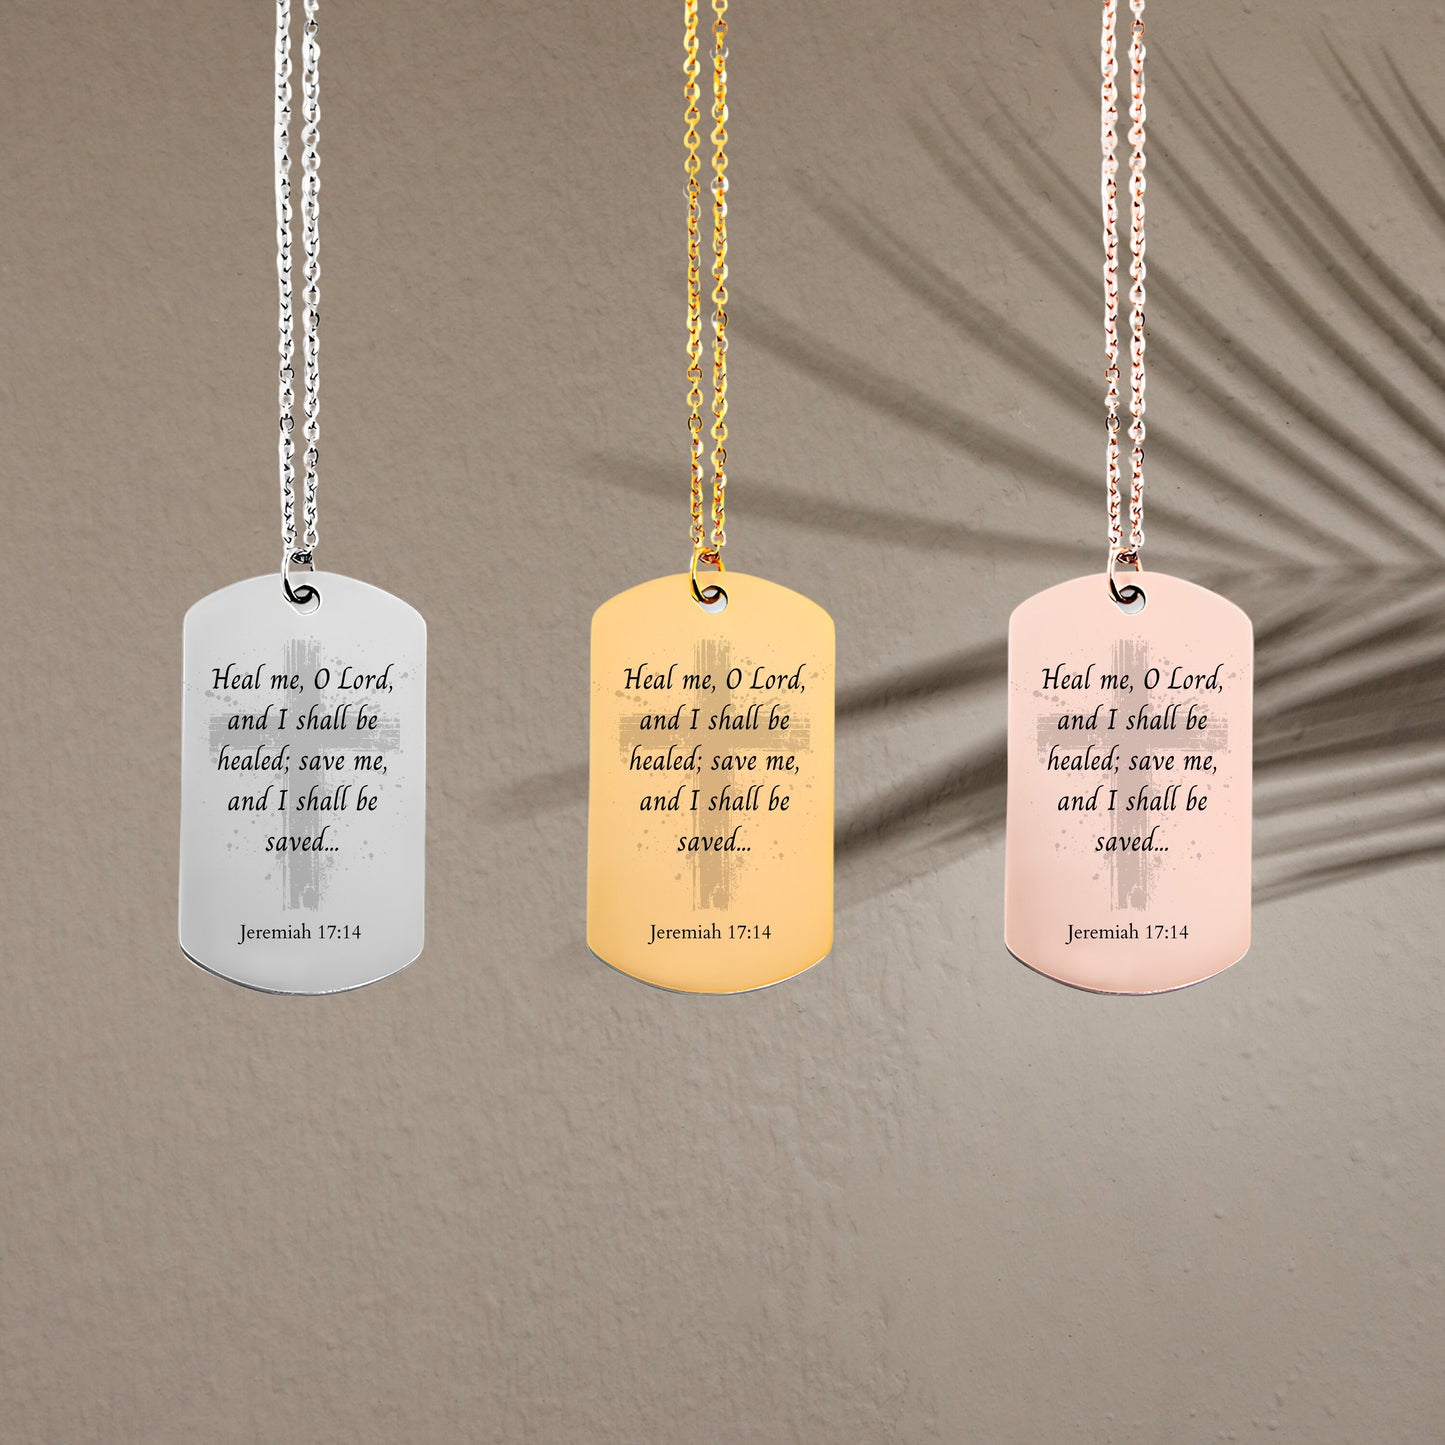 Jeremiah 17 14 quote necklace, gold bible verse, 14k gold cross charm necklace, confirmation gift, gold bar tag necklace,religious scripture